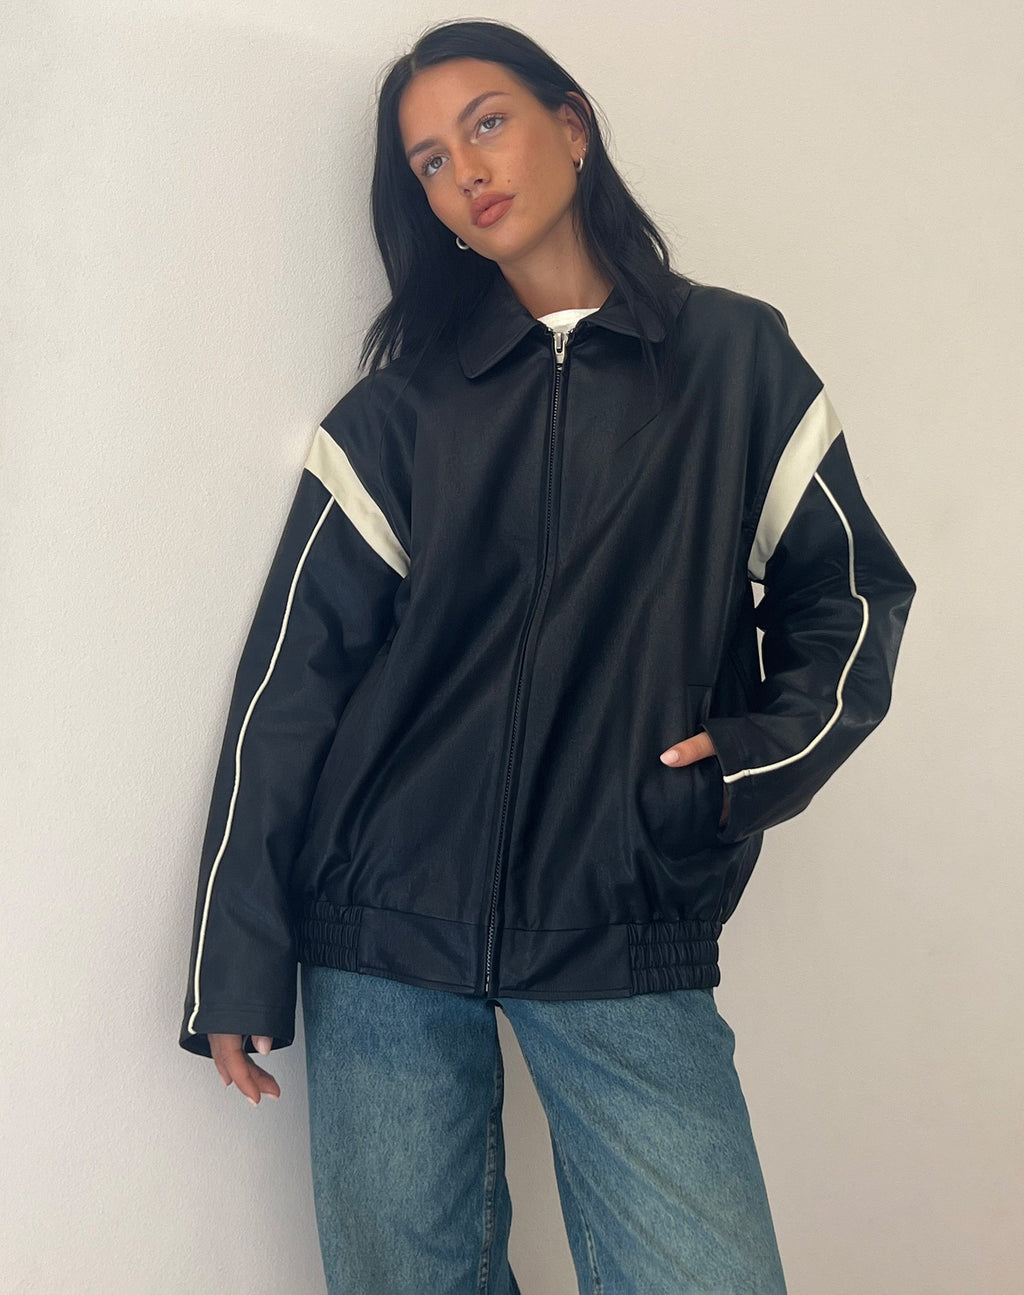 Corvina PU Jacket in Black with Ivory